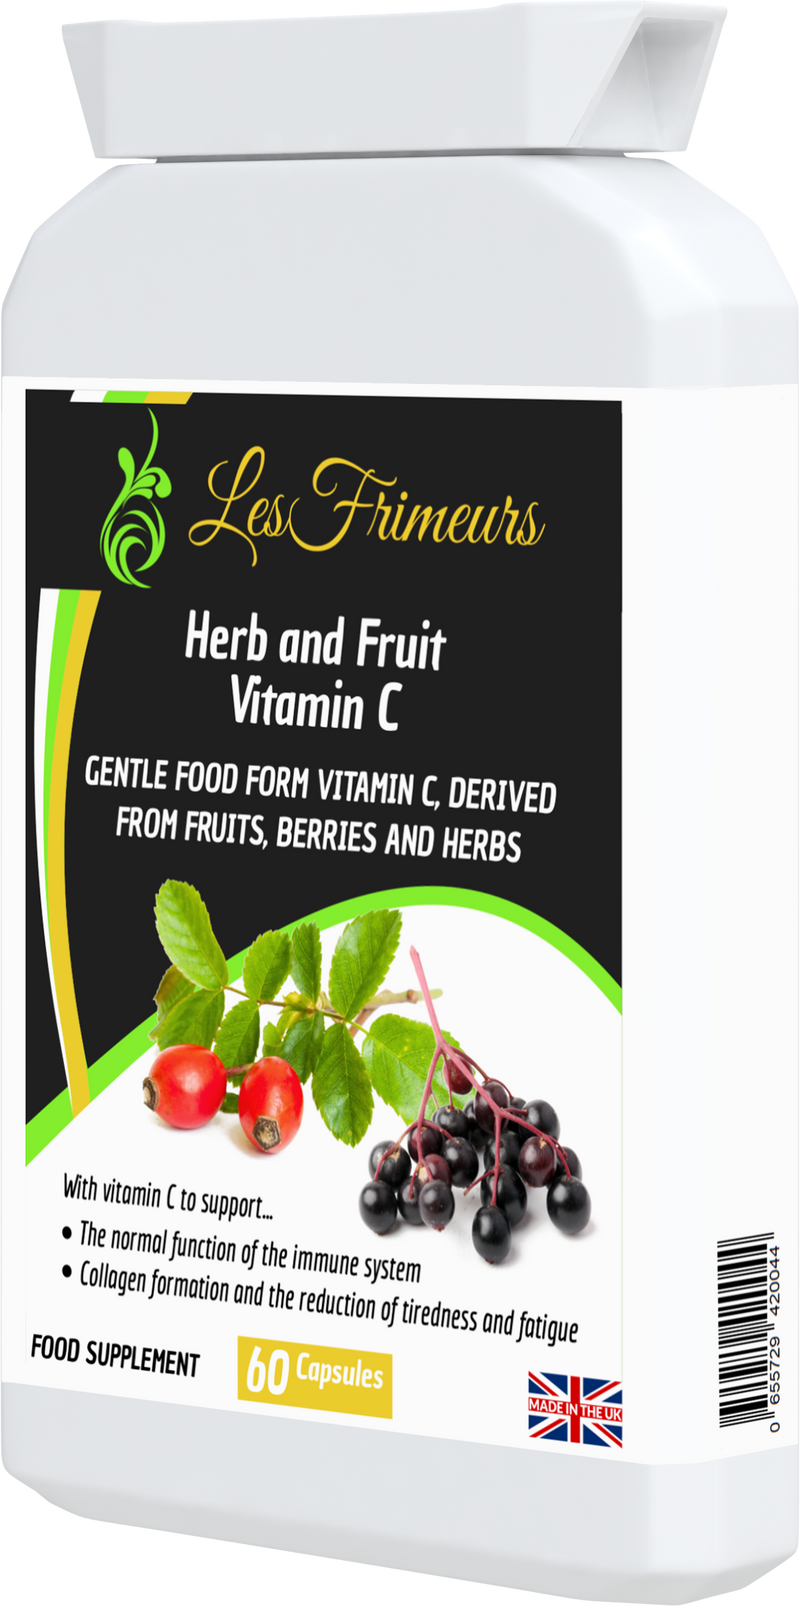 Herb and Fruit Vitamin C